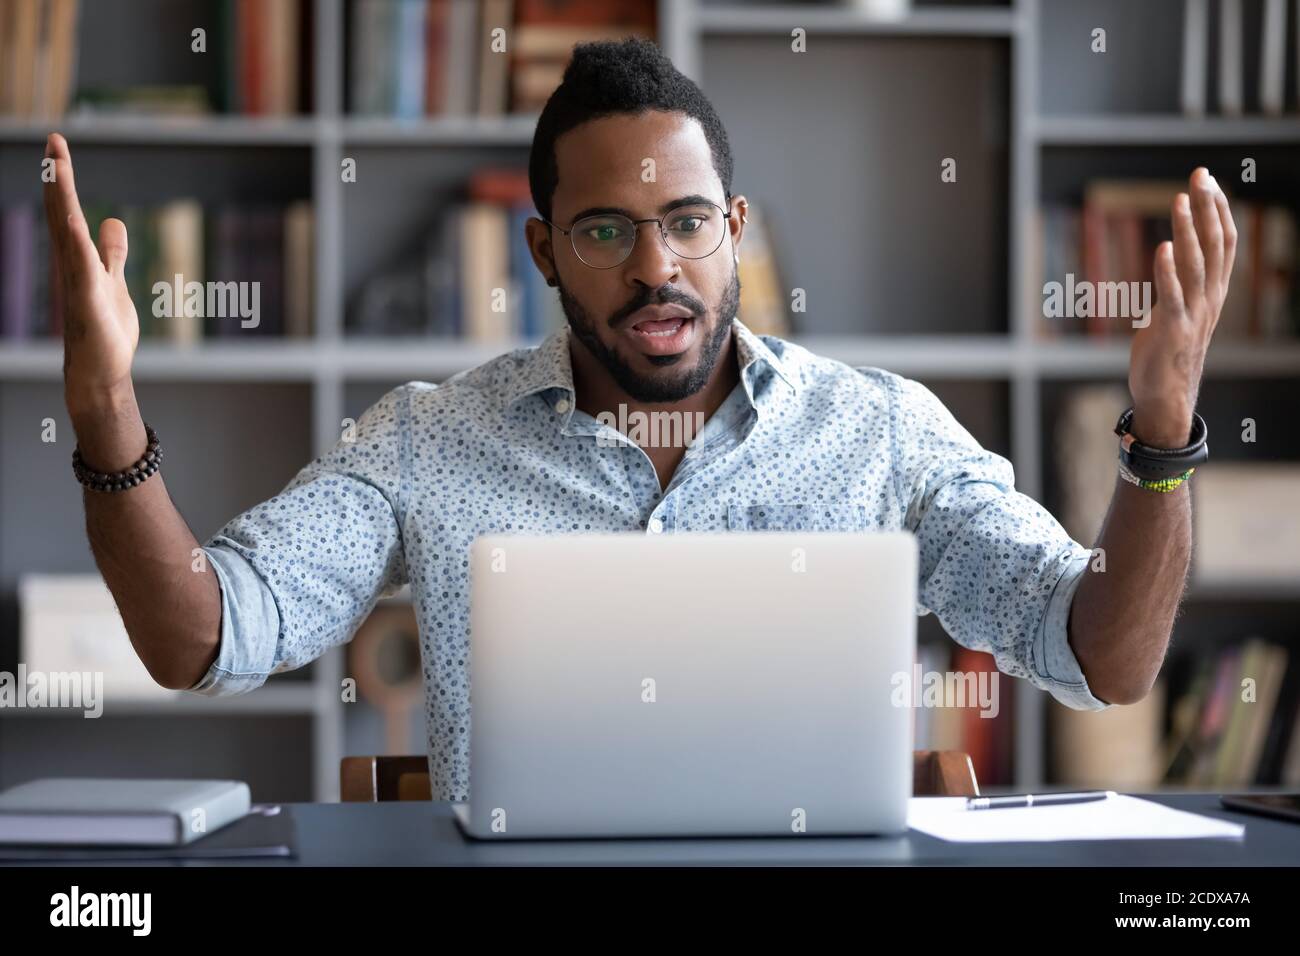 Irritated angry African American man having problem with laptop Stock Photo